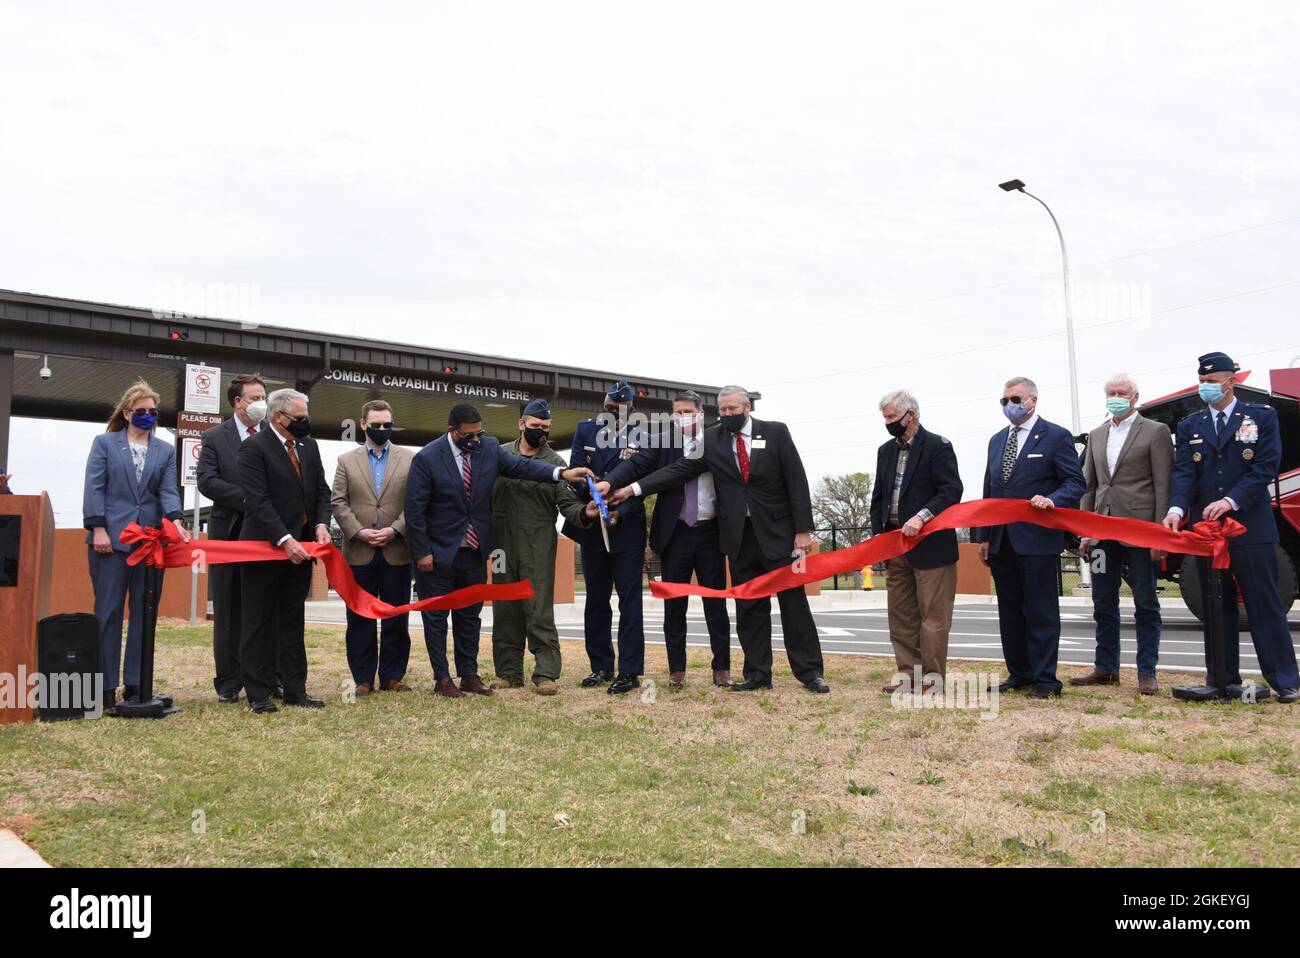 Key leaders from Wichita Falls, Sheppard Air Force Base and the State of Texas cut a ribbon commemorating the completion of the main gate project, April 2, 2021. The nearly $9 million dollar project began in March 2019 and is a statement to the state, local and military partnerships with three different revenue streams contributing to the effort. Stock Photo